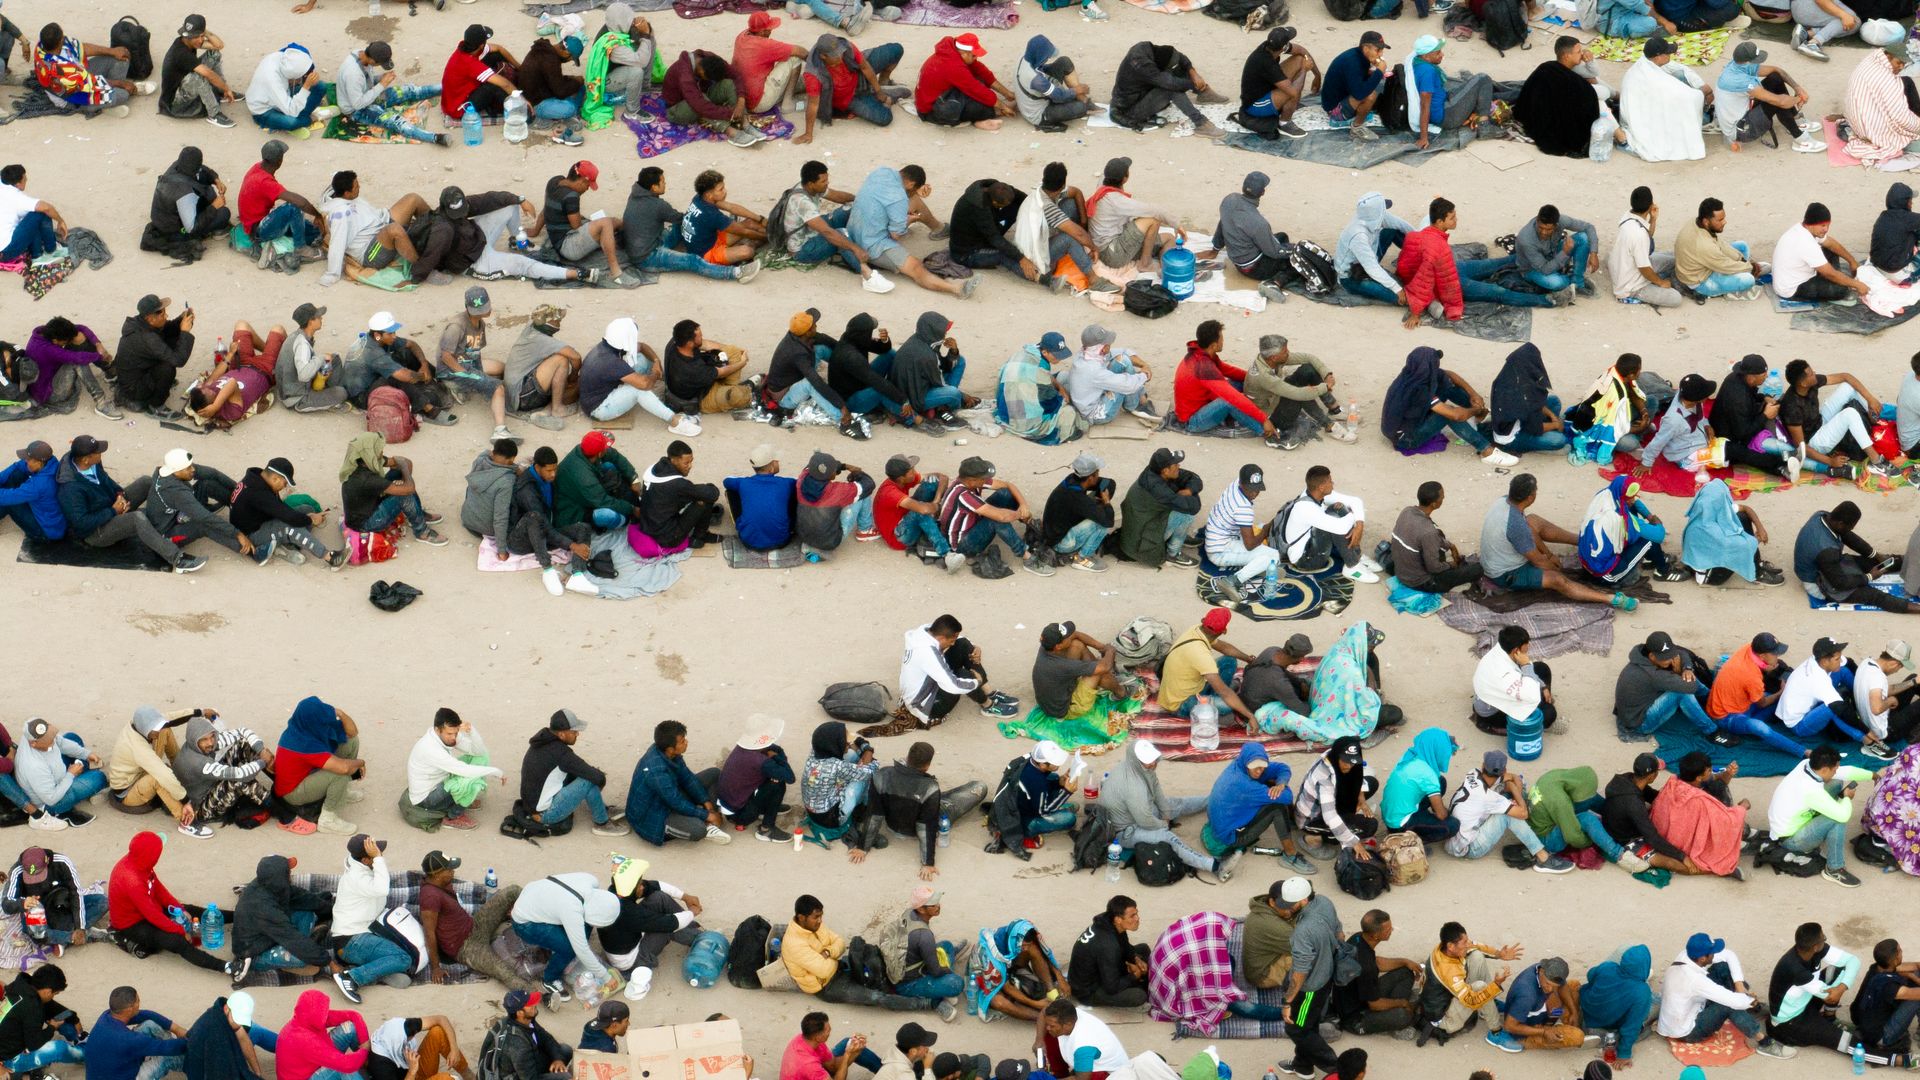 Migrants wait in lines in Mexico, across the border from El Paso, Texas.